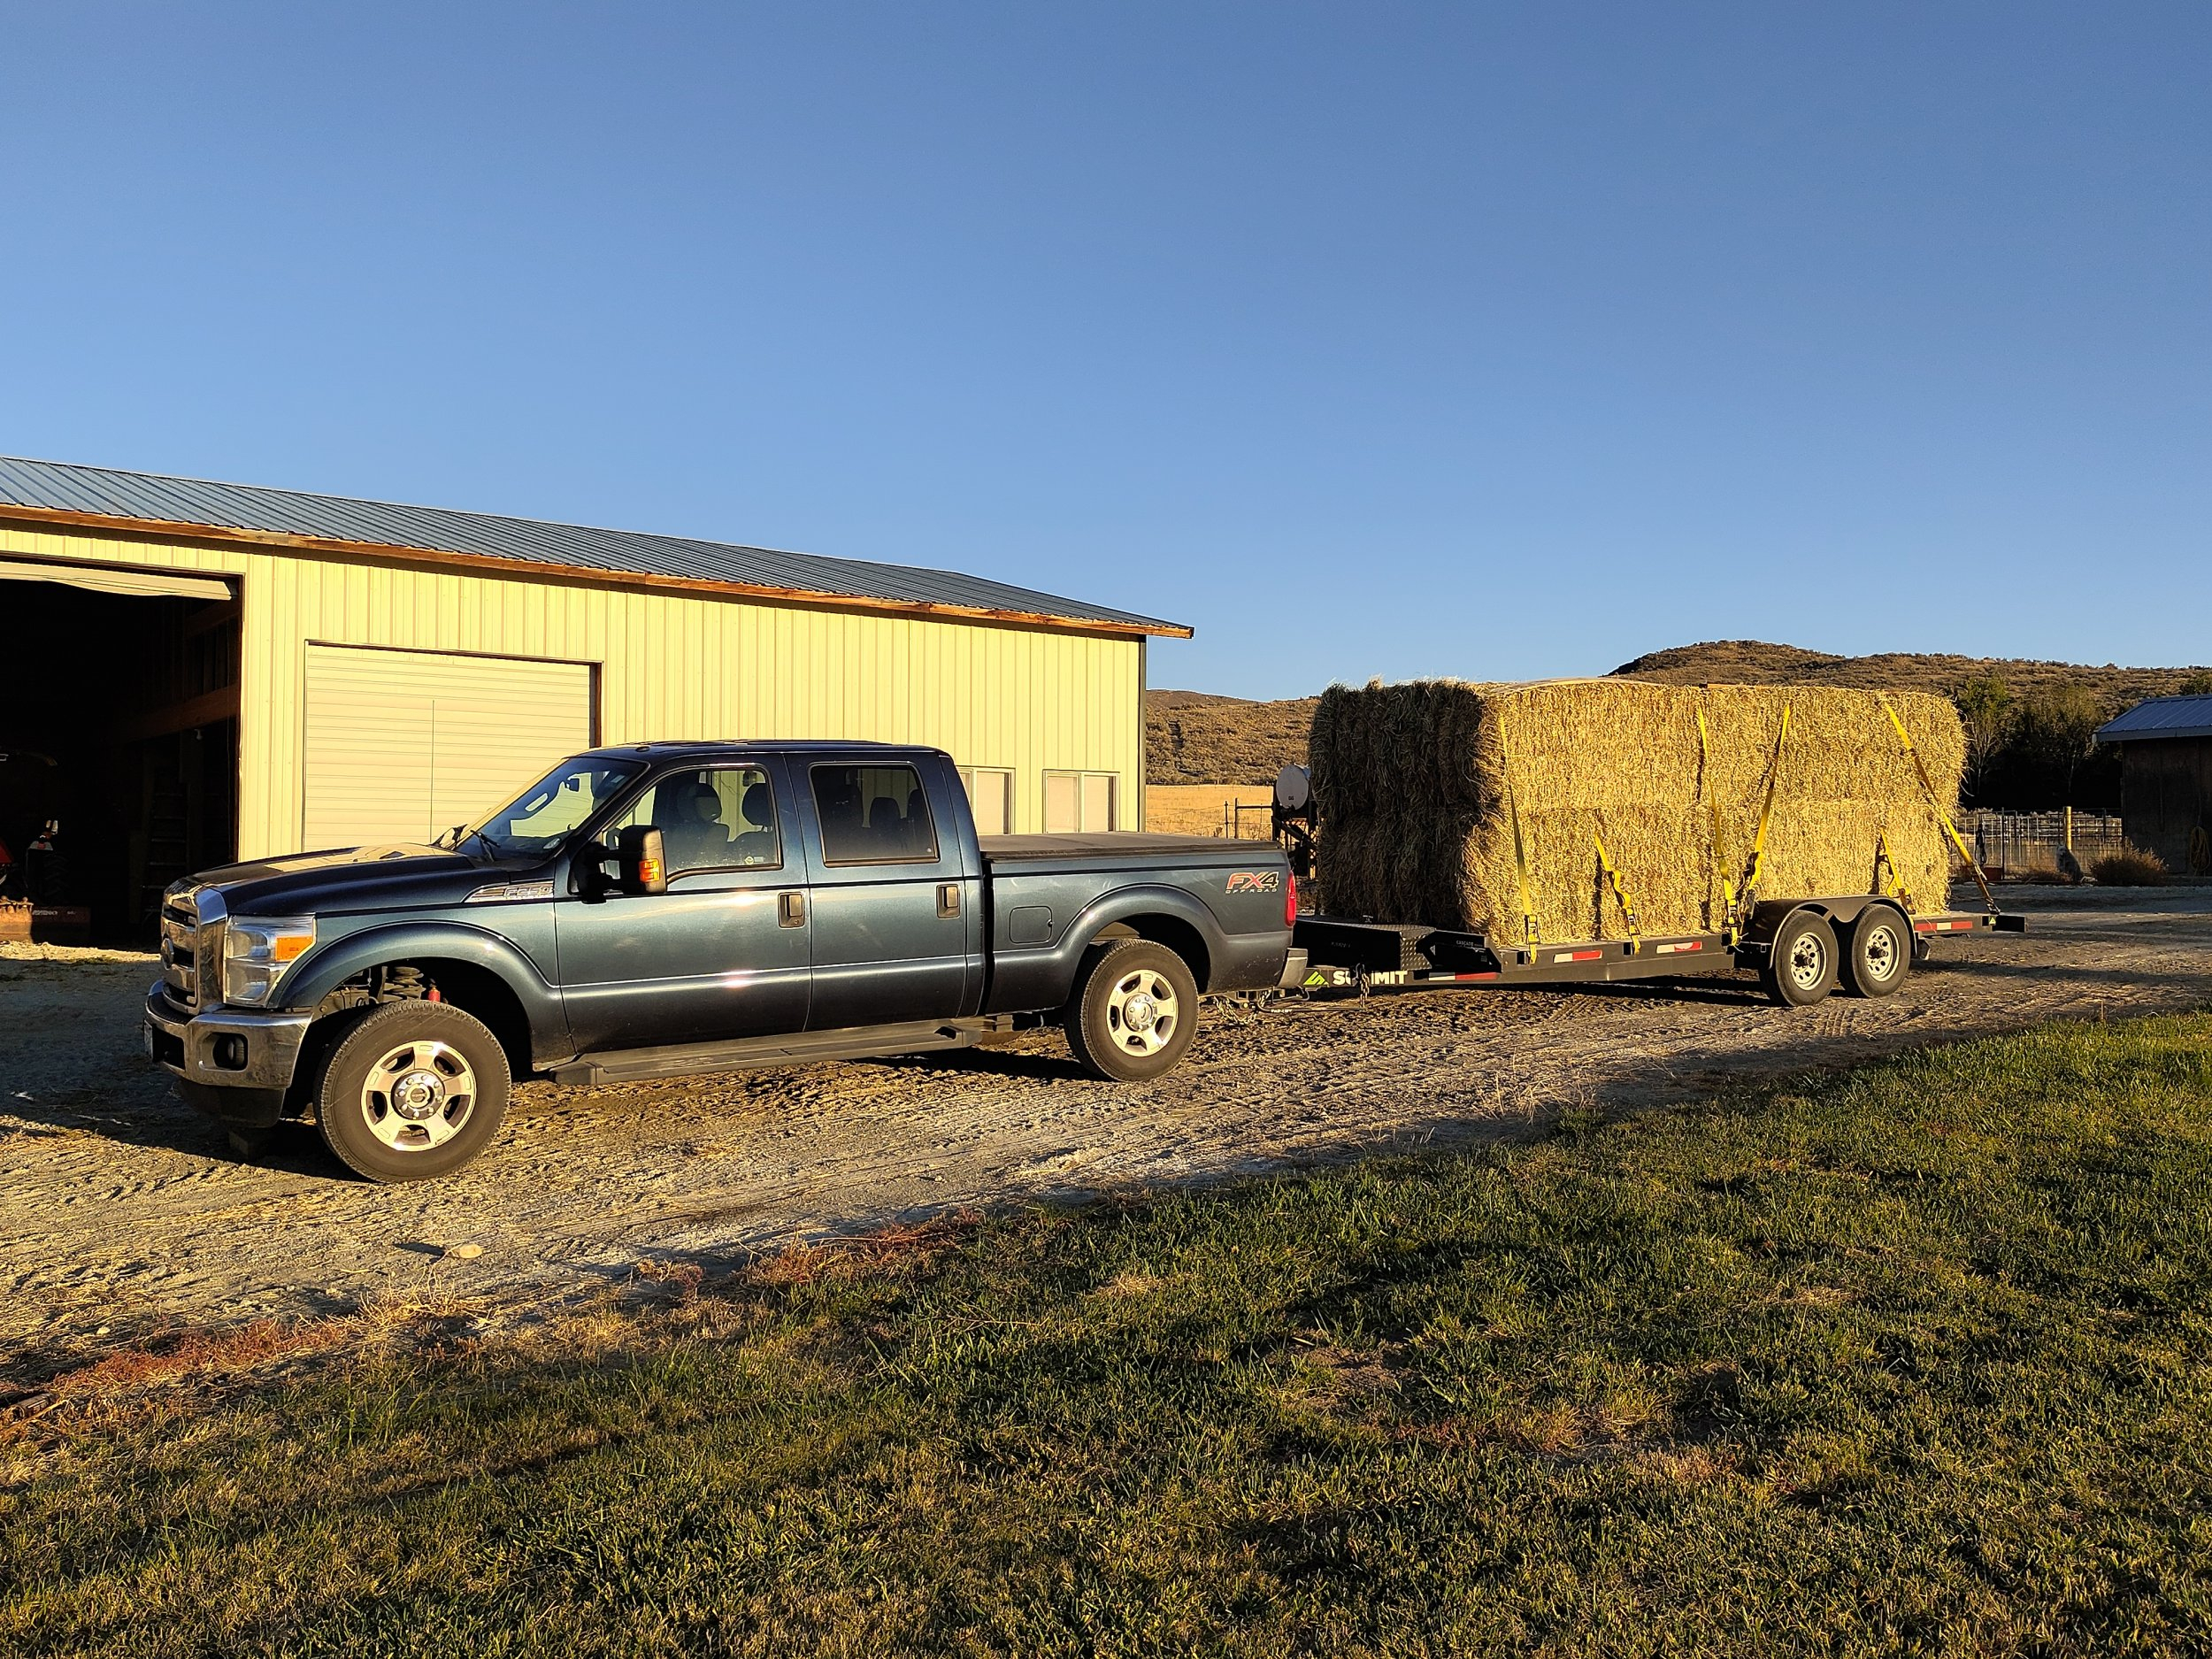 Truck and Hay.jpg